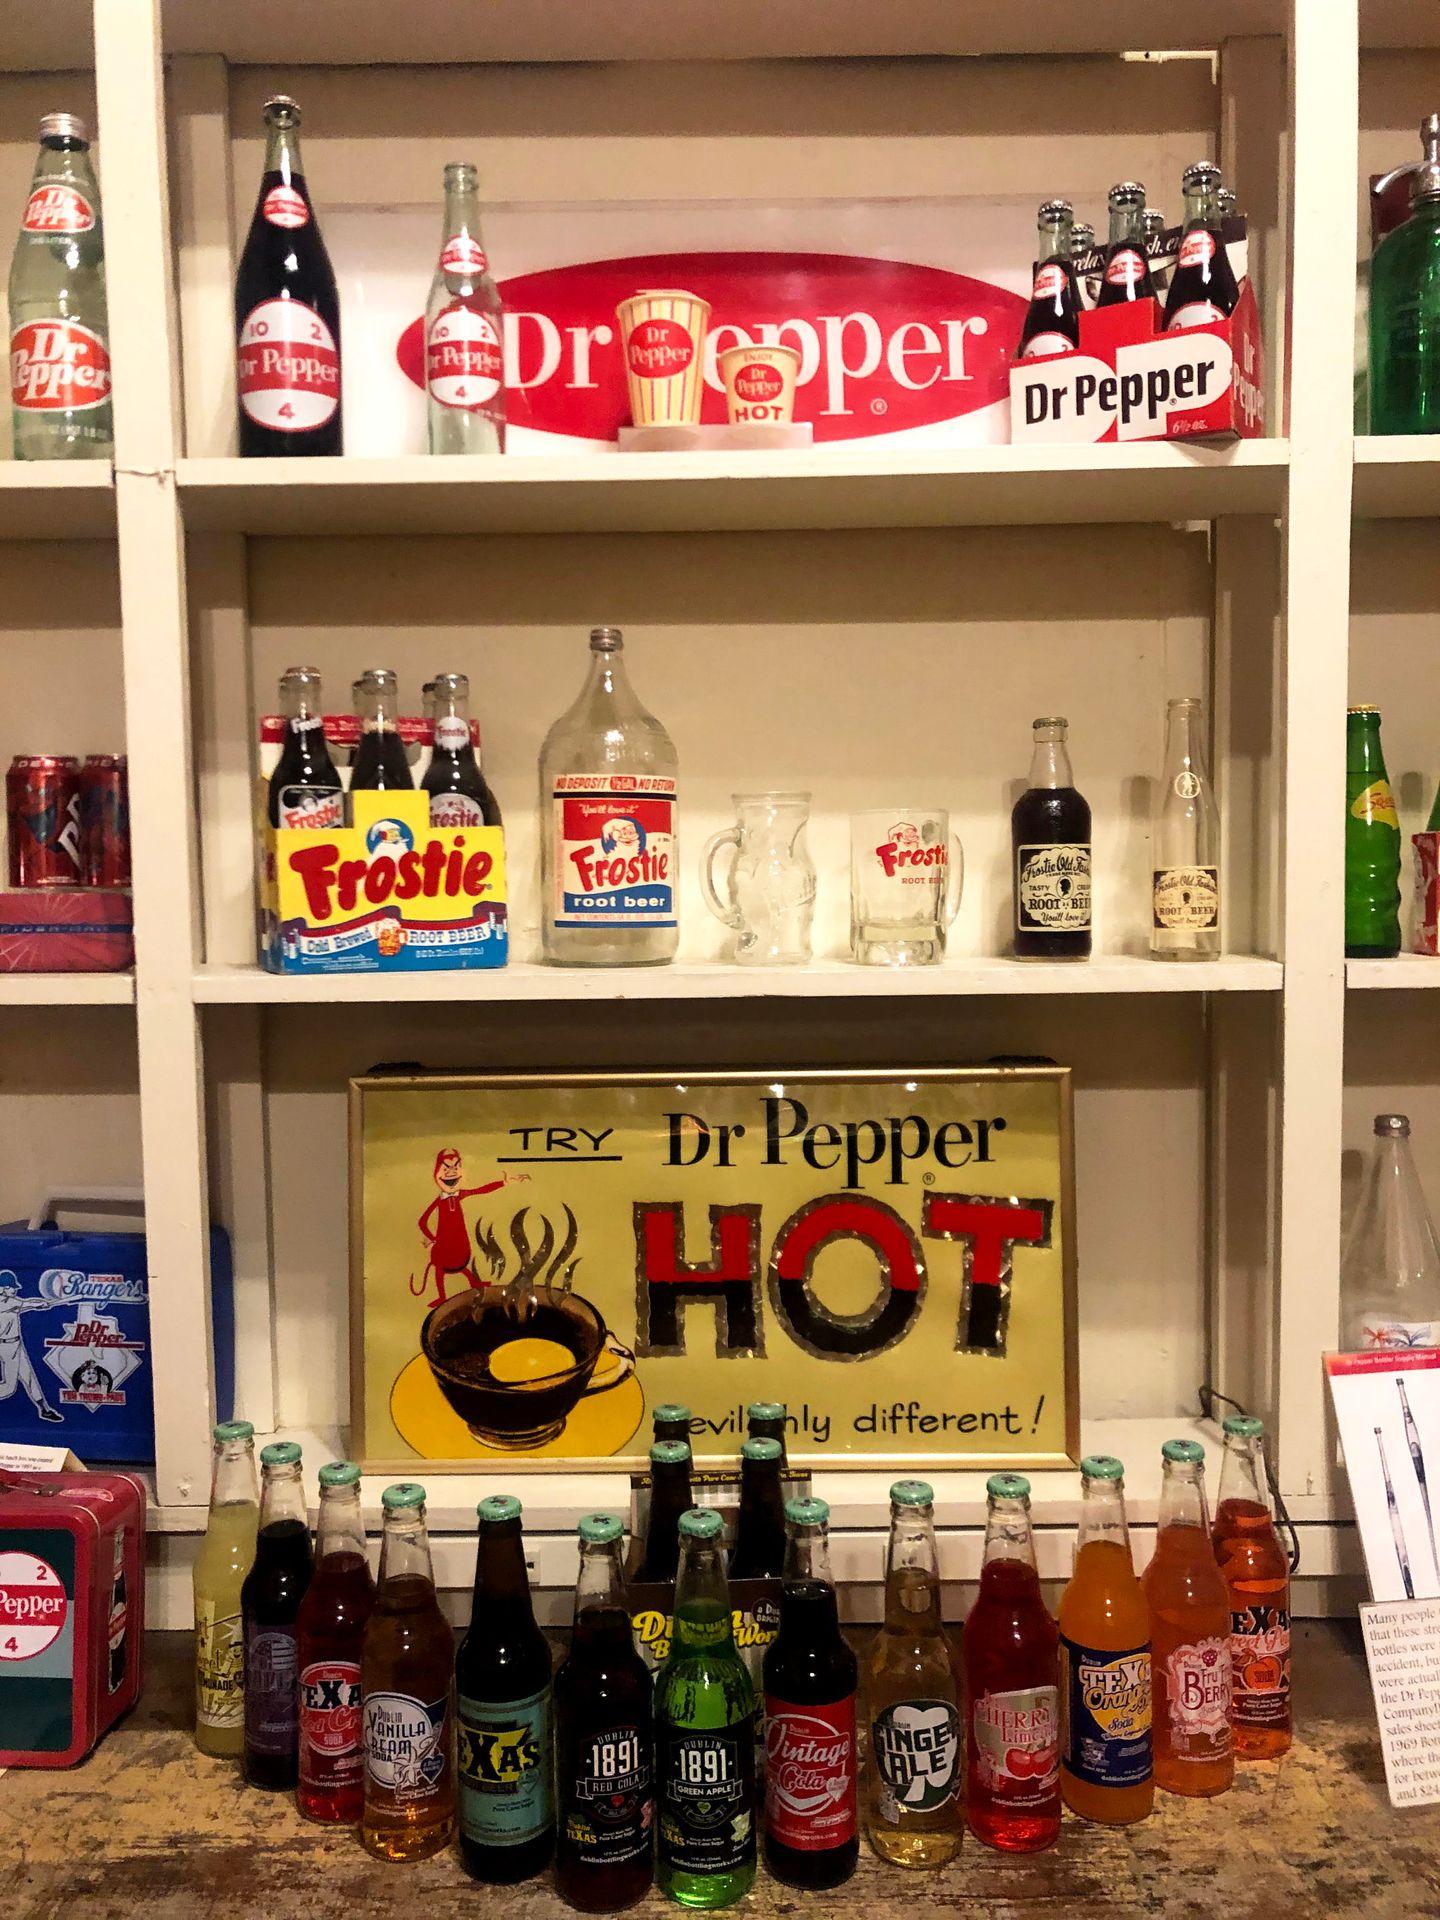 A display from the Dublin bottling works tour that includes a sign for hot Dr. Pepper and Frostie root beer